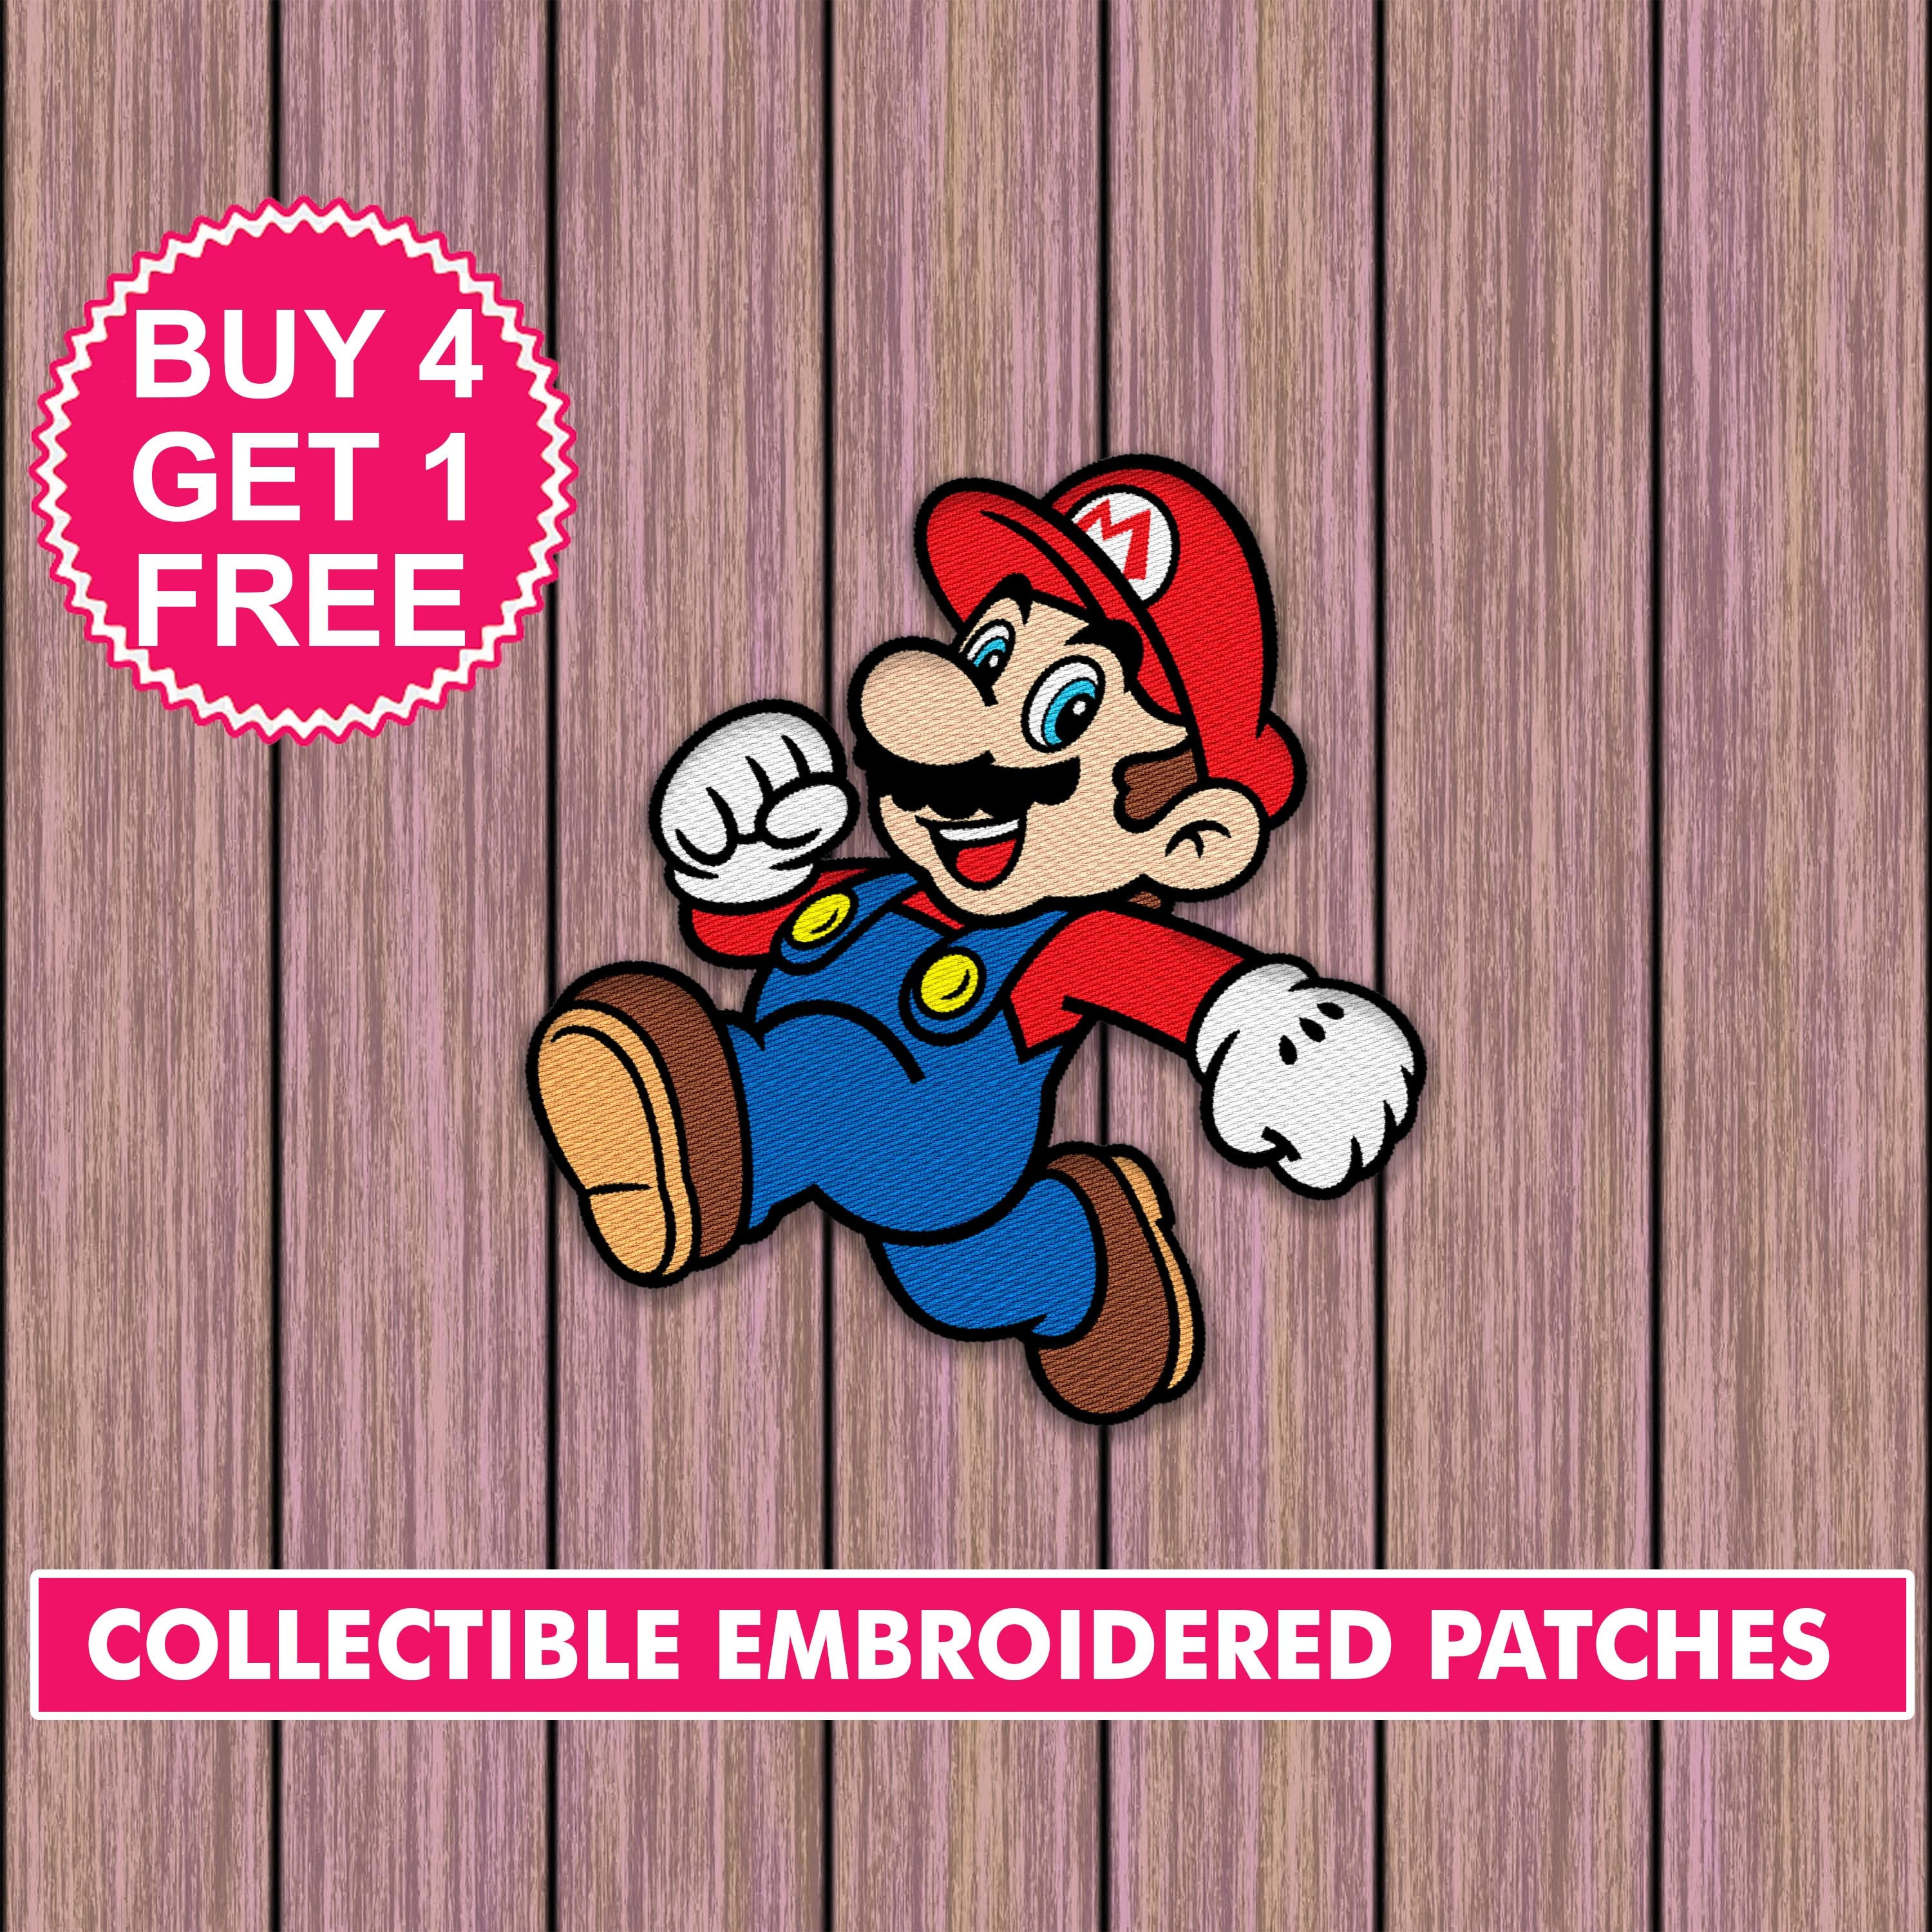 Super Mario Number One Patch Nintendo Smash Bros Embroidered Iron On